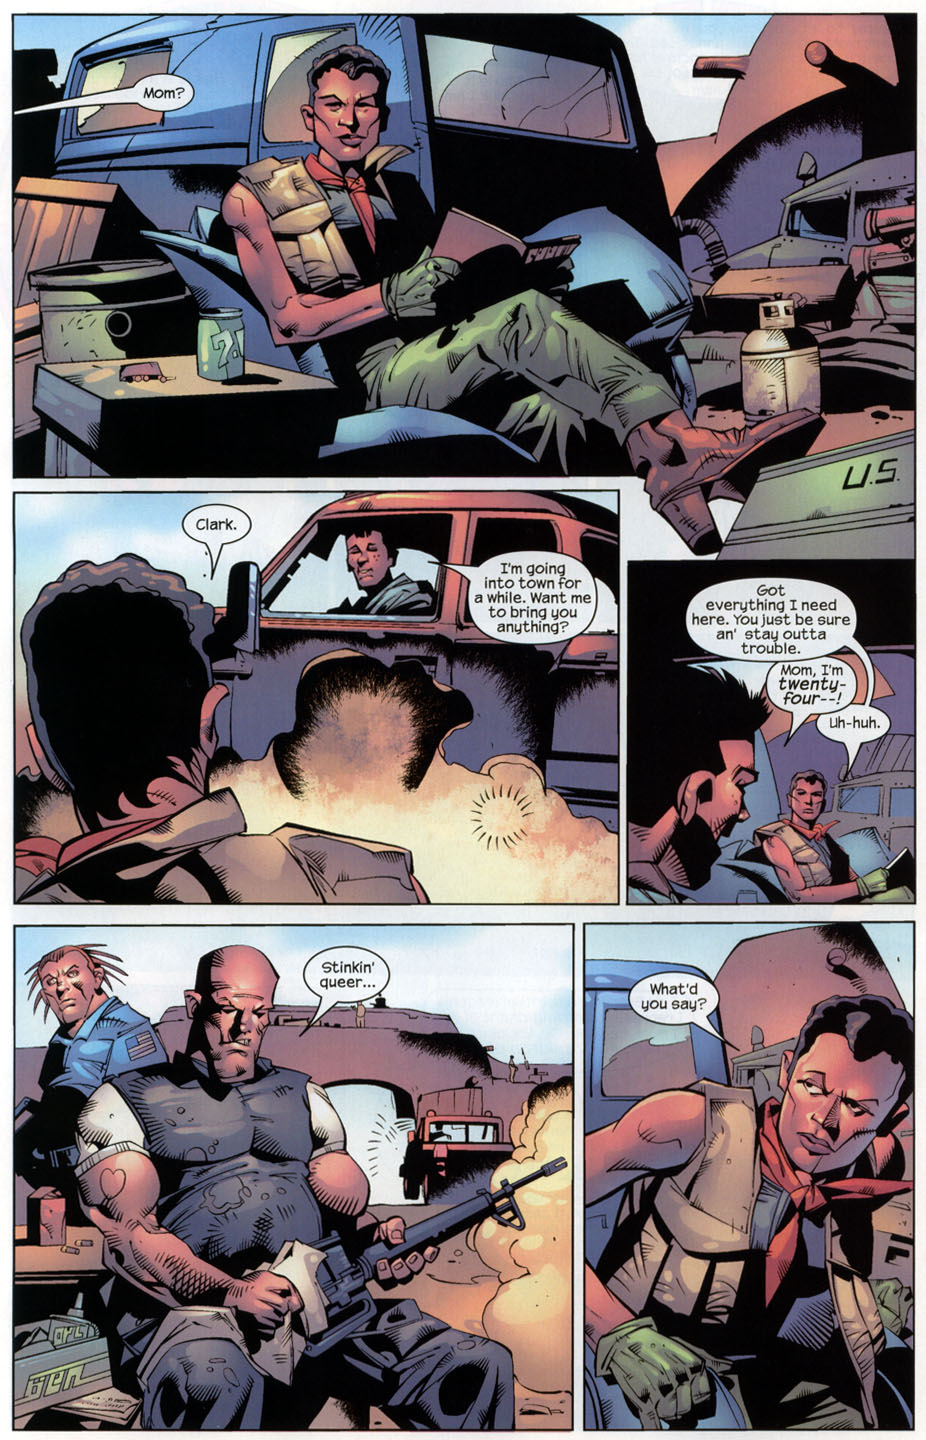 The Punisher (2001) issue 29 - Streets of Laredo #02 - Page 5